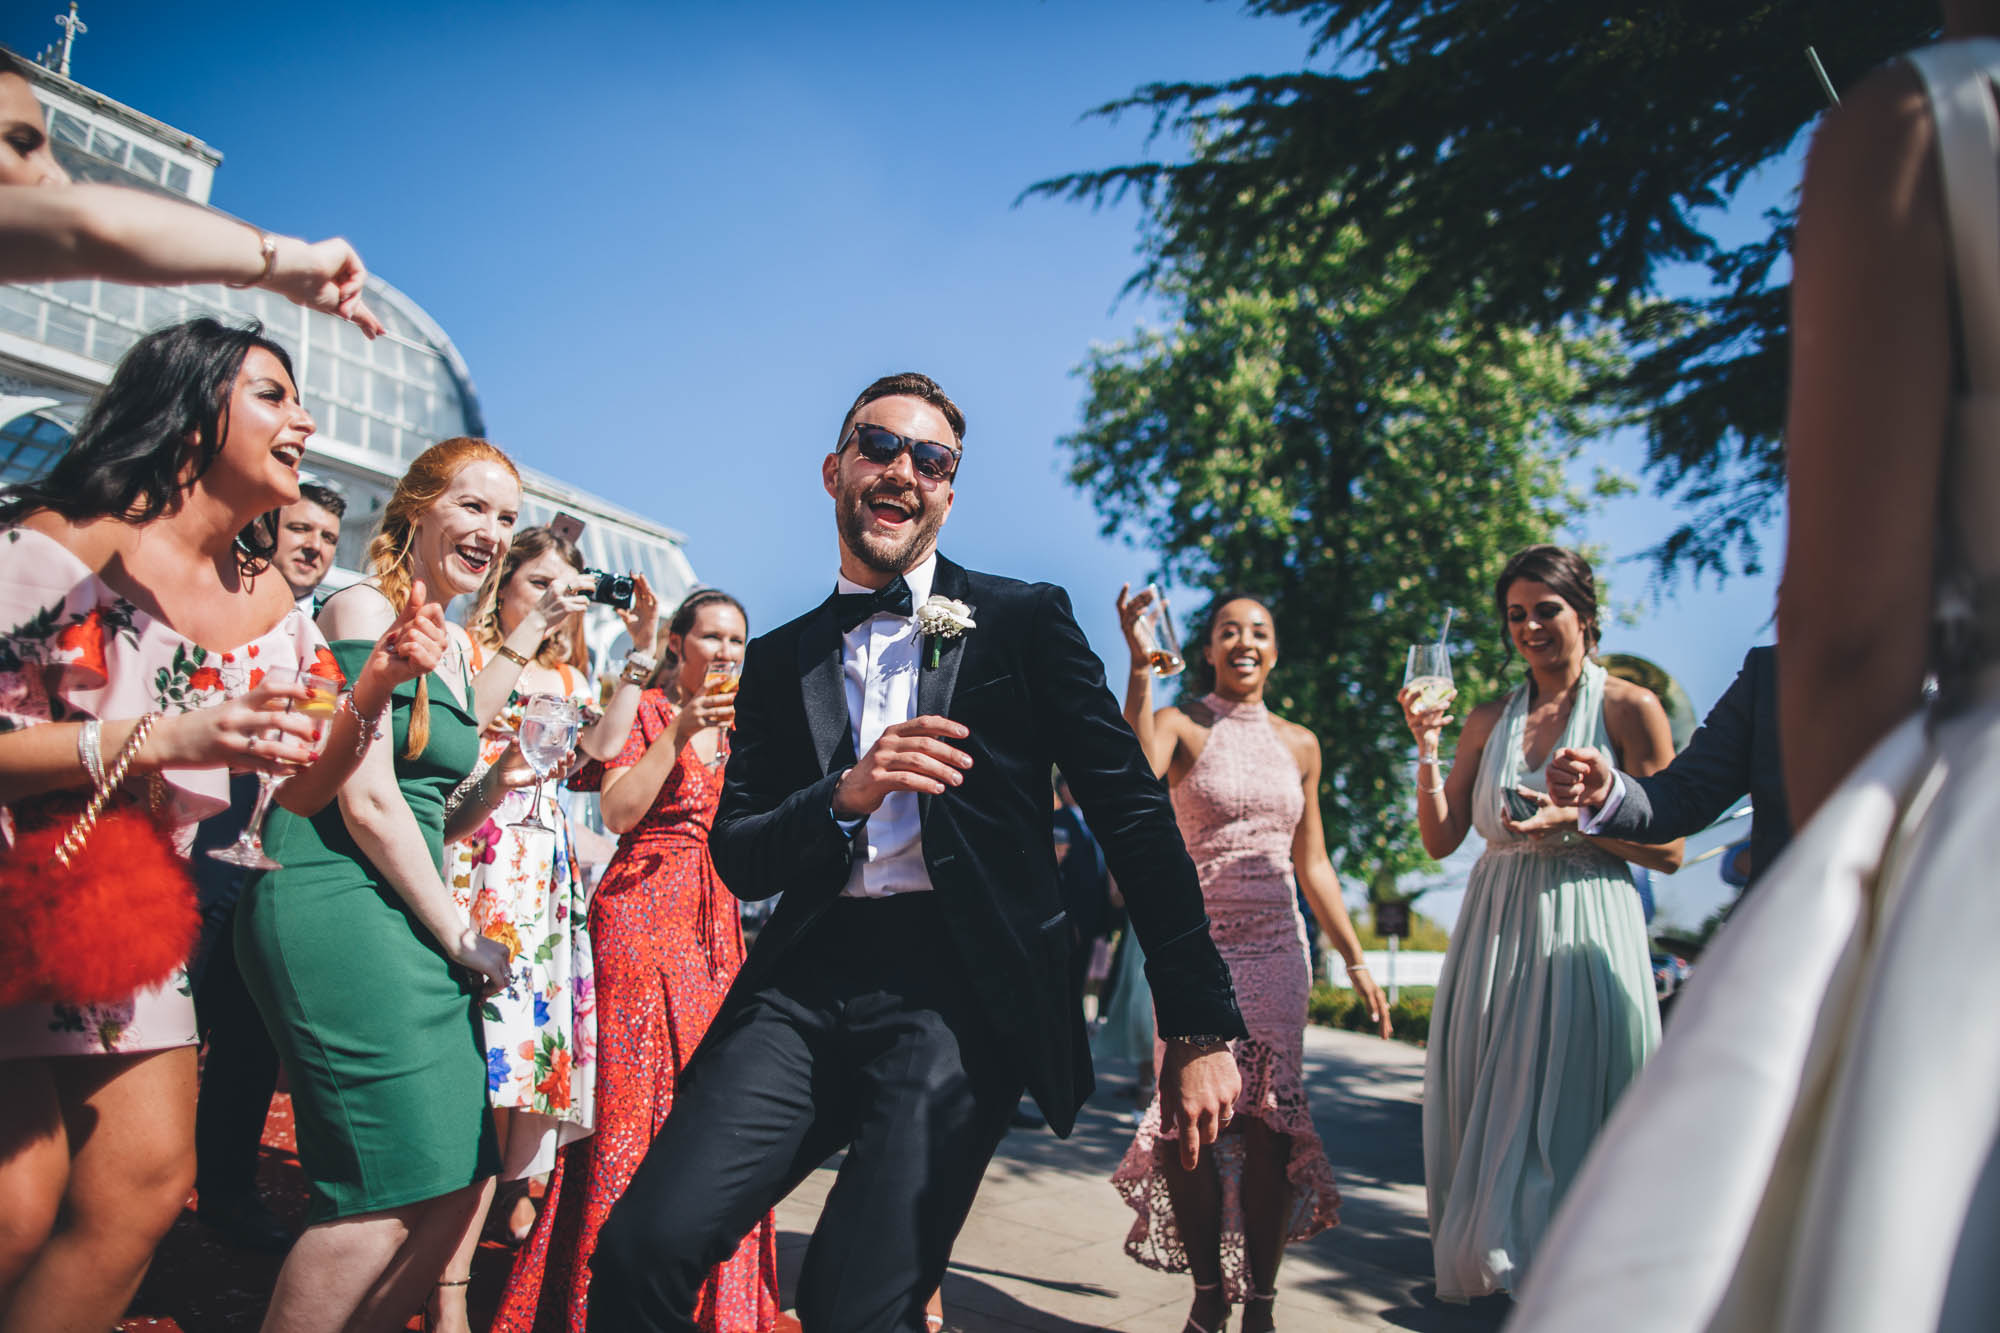 Groom shows off his dance moves outside in front of wedding guests and Bride